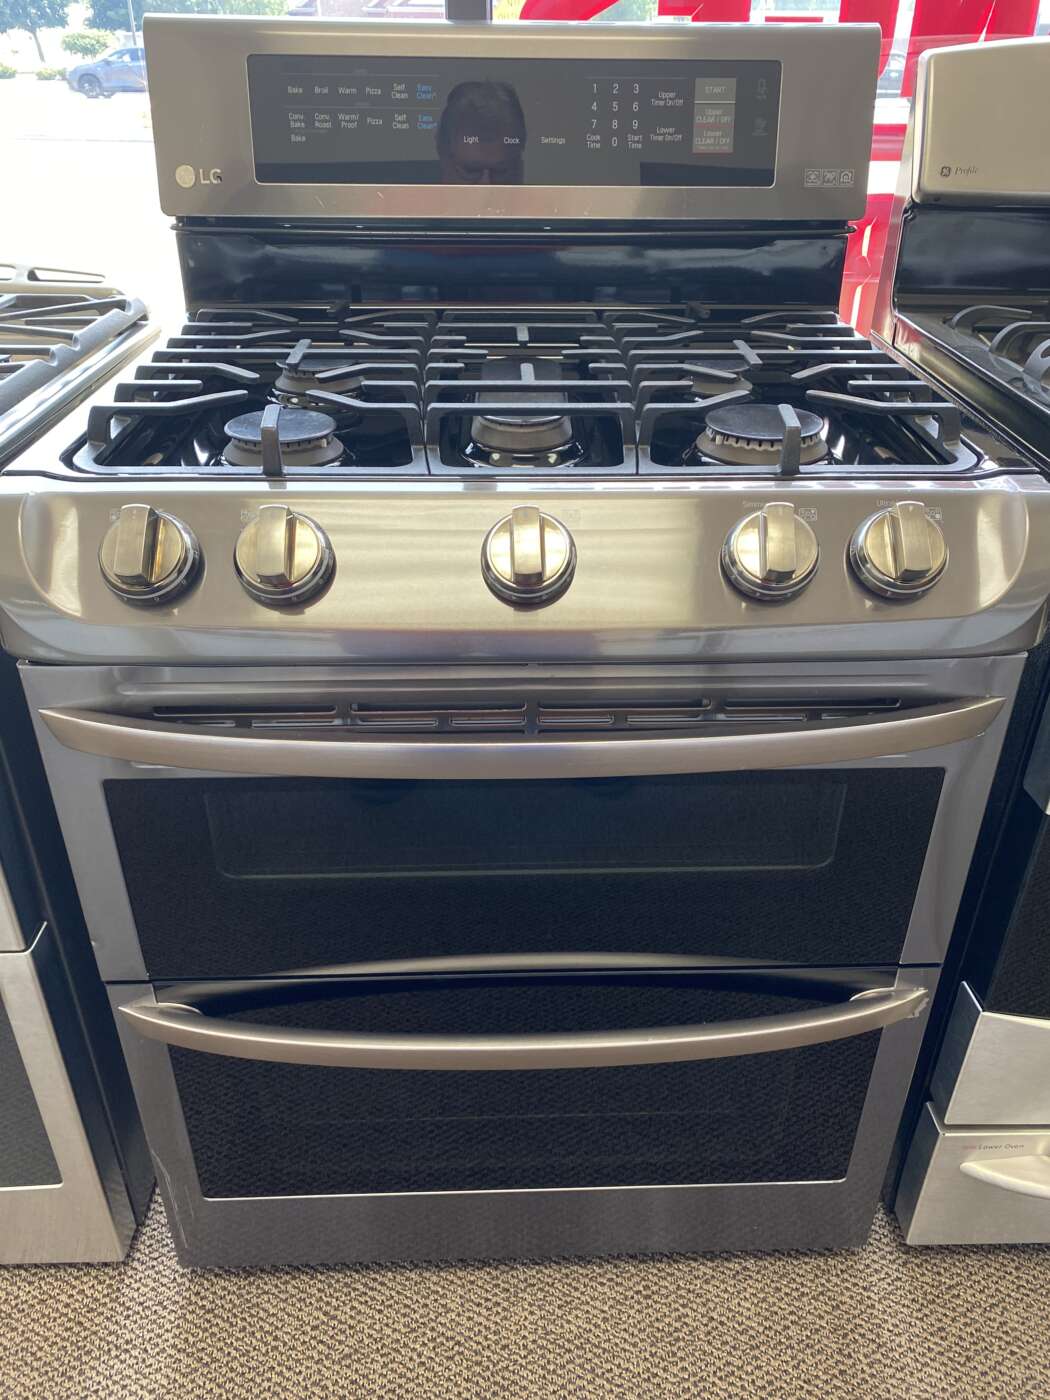 Reconditioned L/G Self-Clean Convection Double-Oven GAS Range – Black Stainless